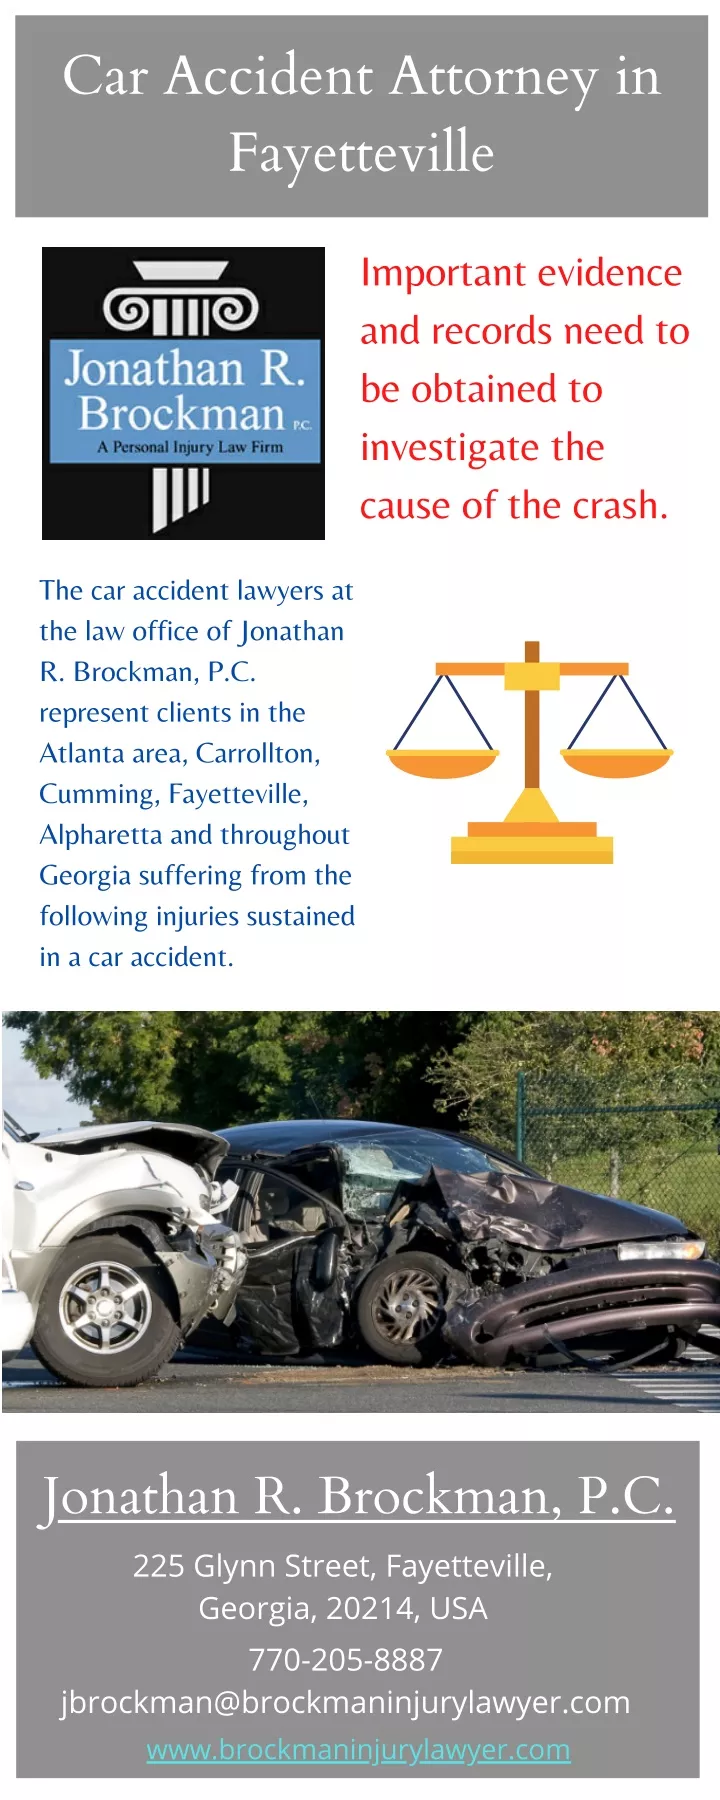 car accident attorney in fayetteville